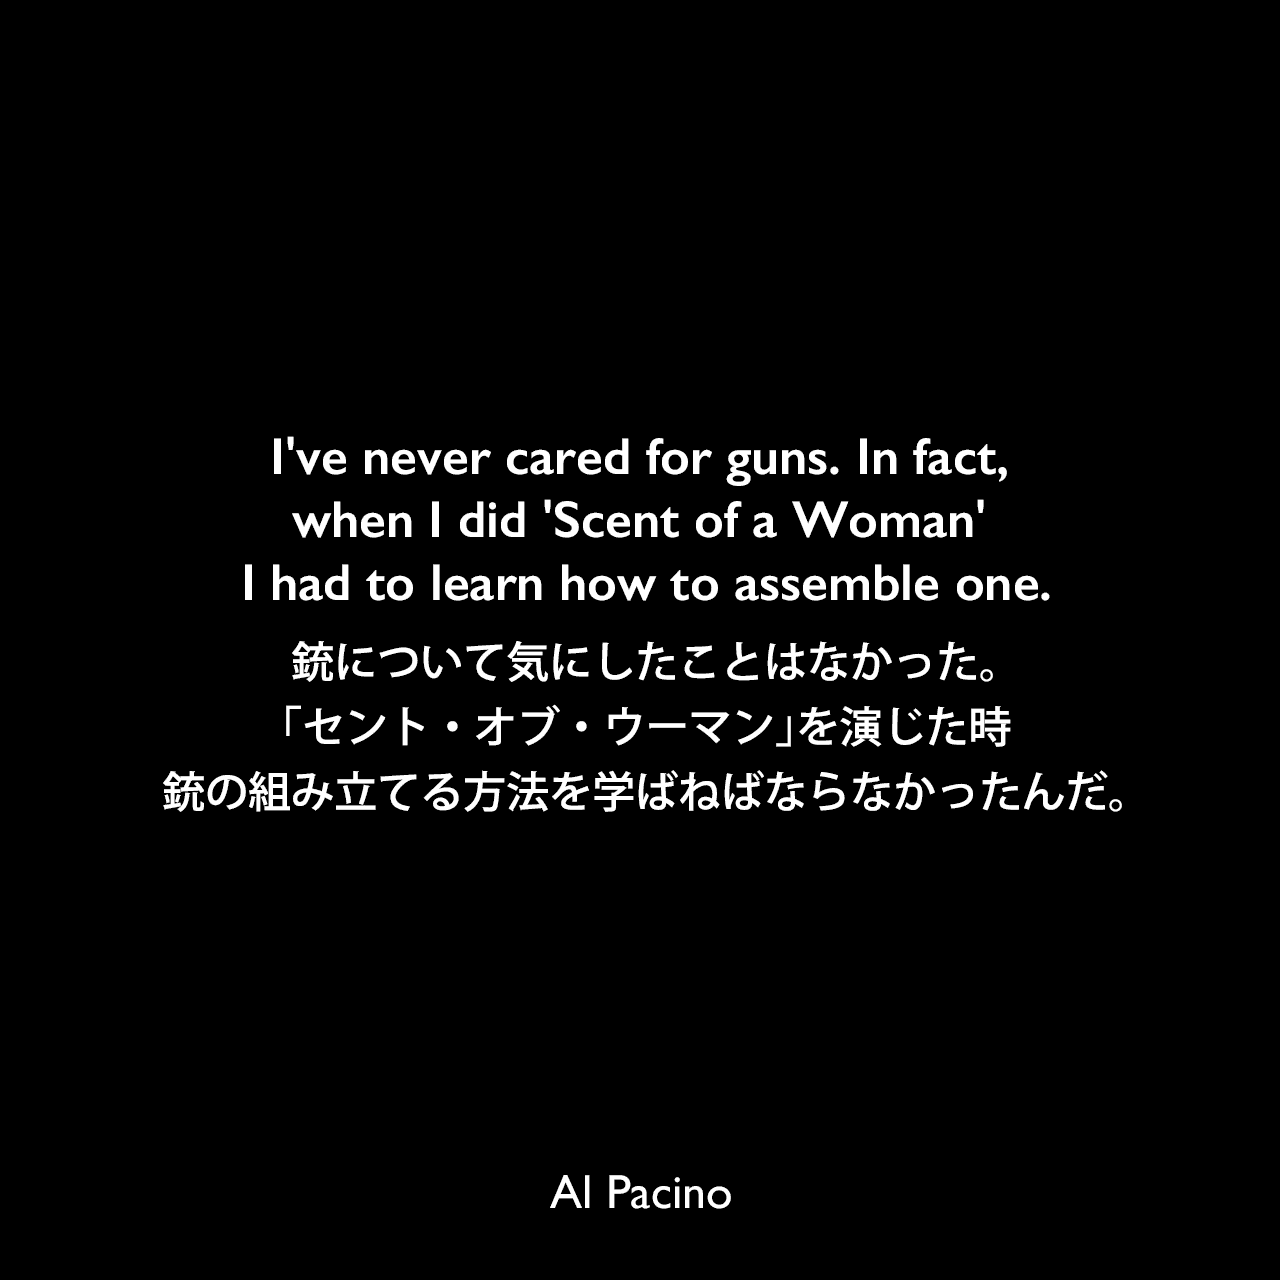 I've never cared for guns. In fact, when I did 'Scent of a Woman' I had to learn how to assemble one.銃について気にしたことはなかった。「セント・オブ・ウーマン」を演じた時、銃の組み立てる方法を学ばねばならなかったんだ。Al Pacino